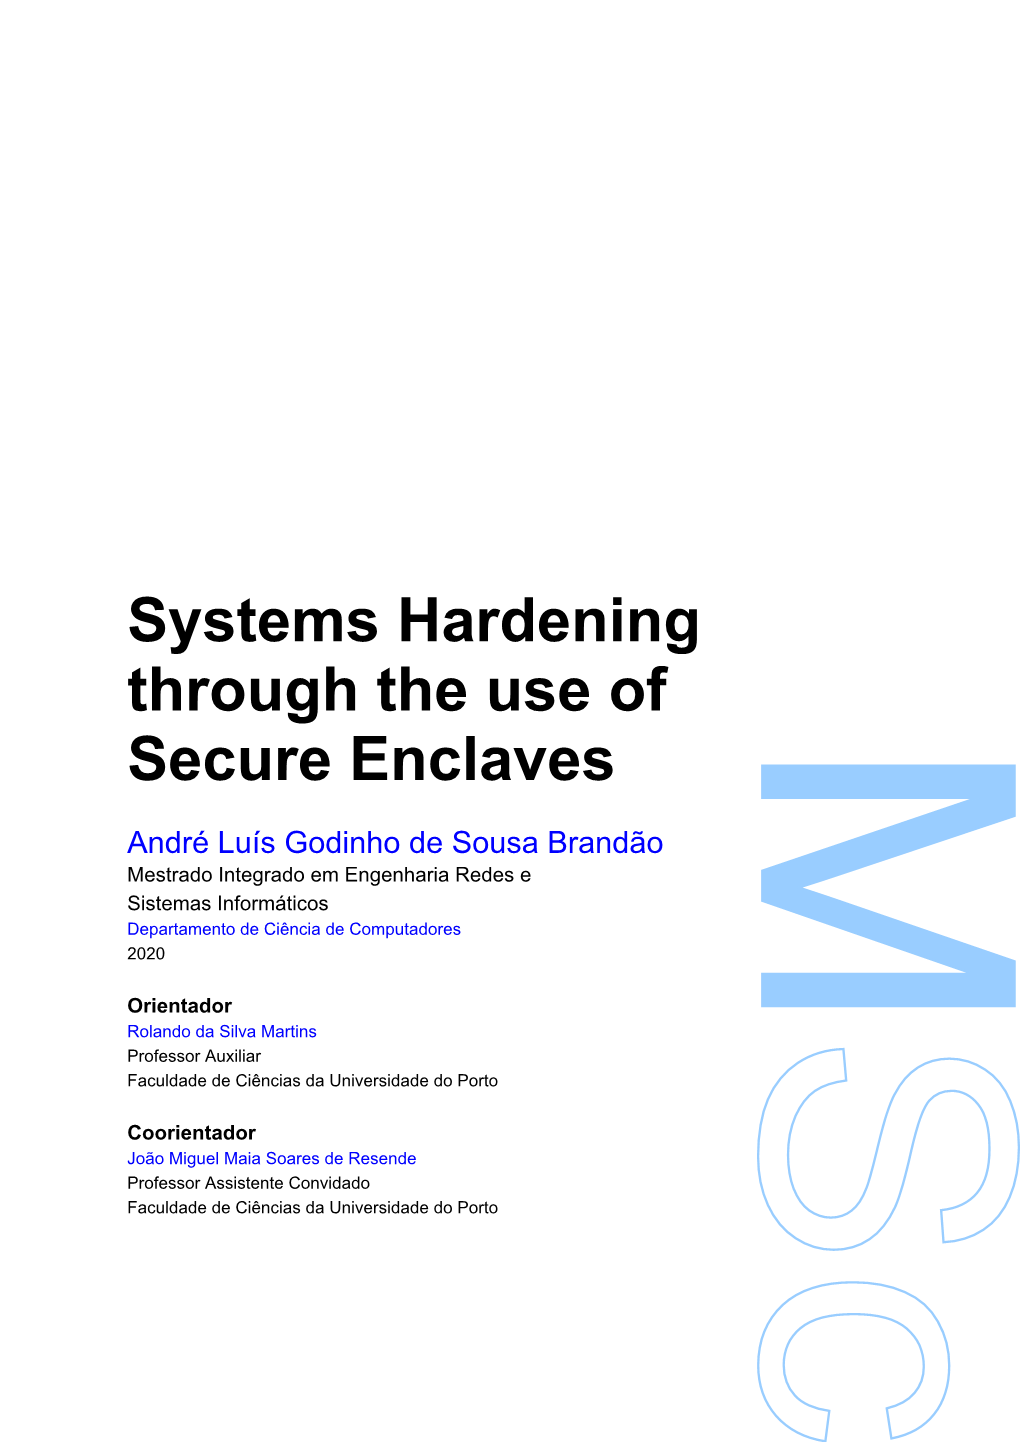 Systems Hardening Through the Use of Secure Enclaves